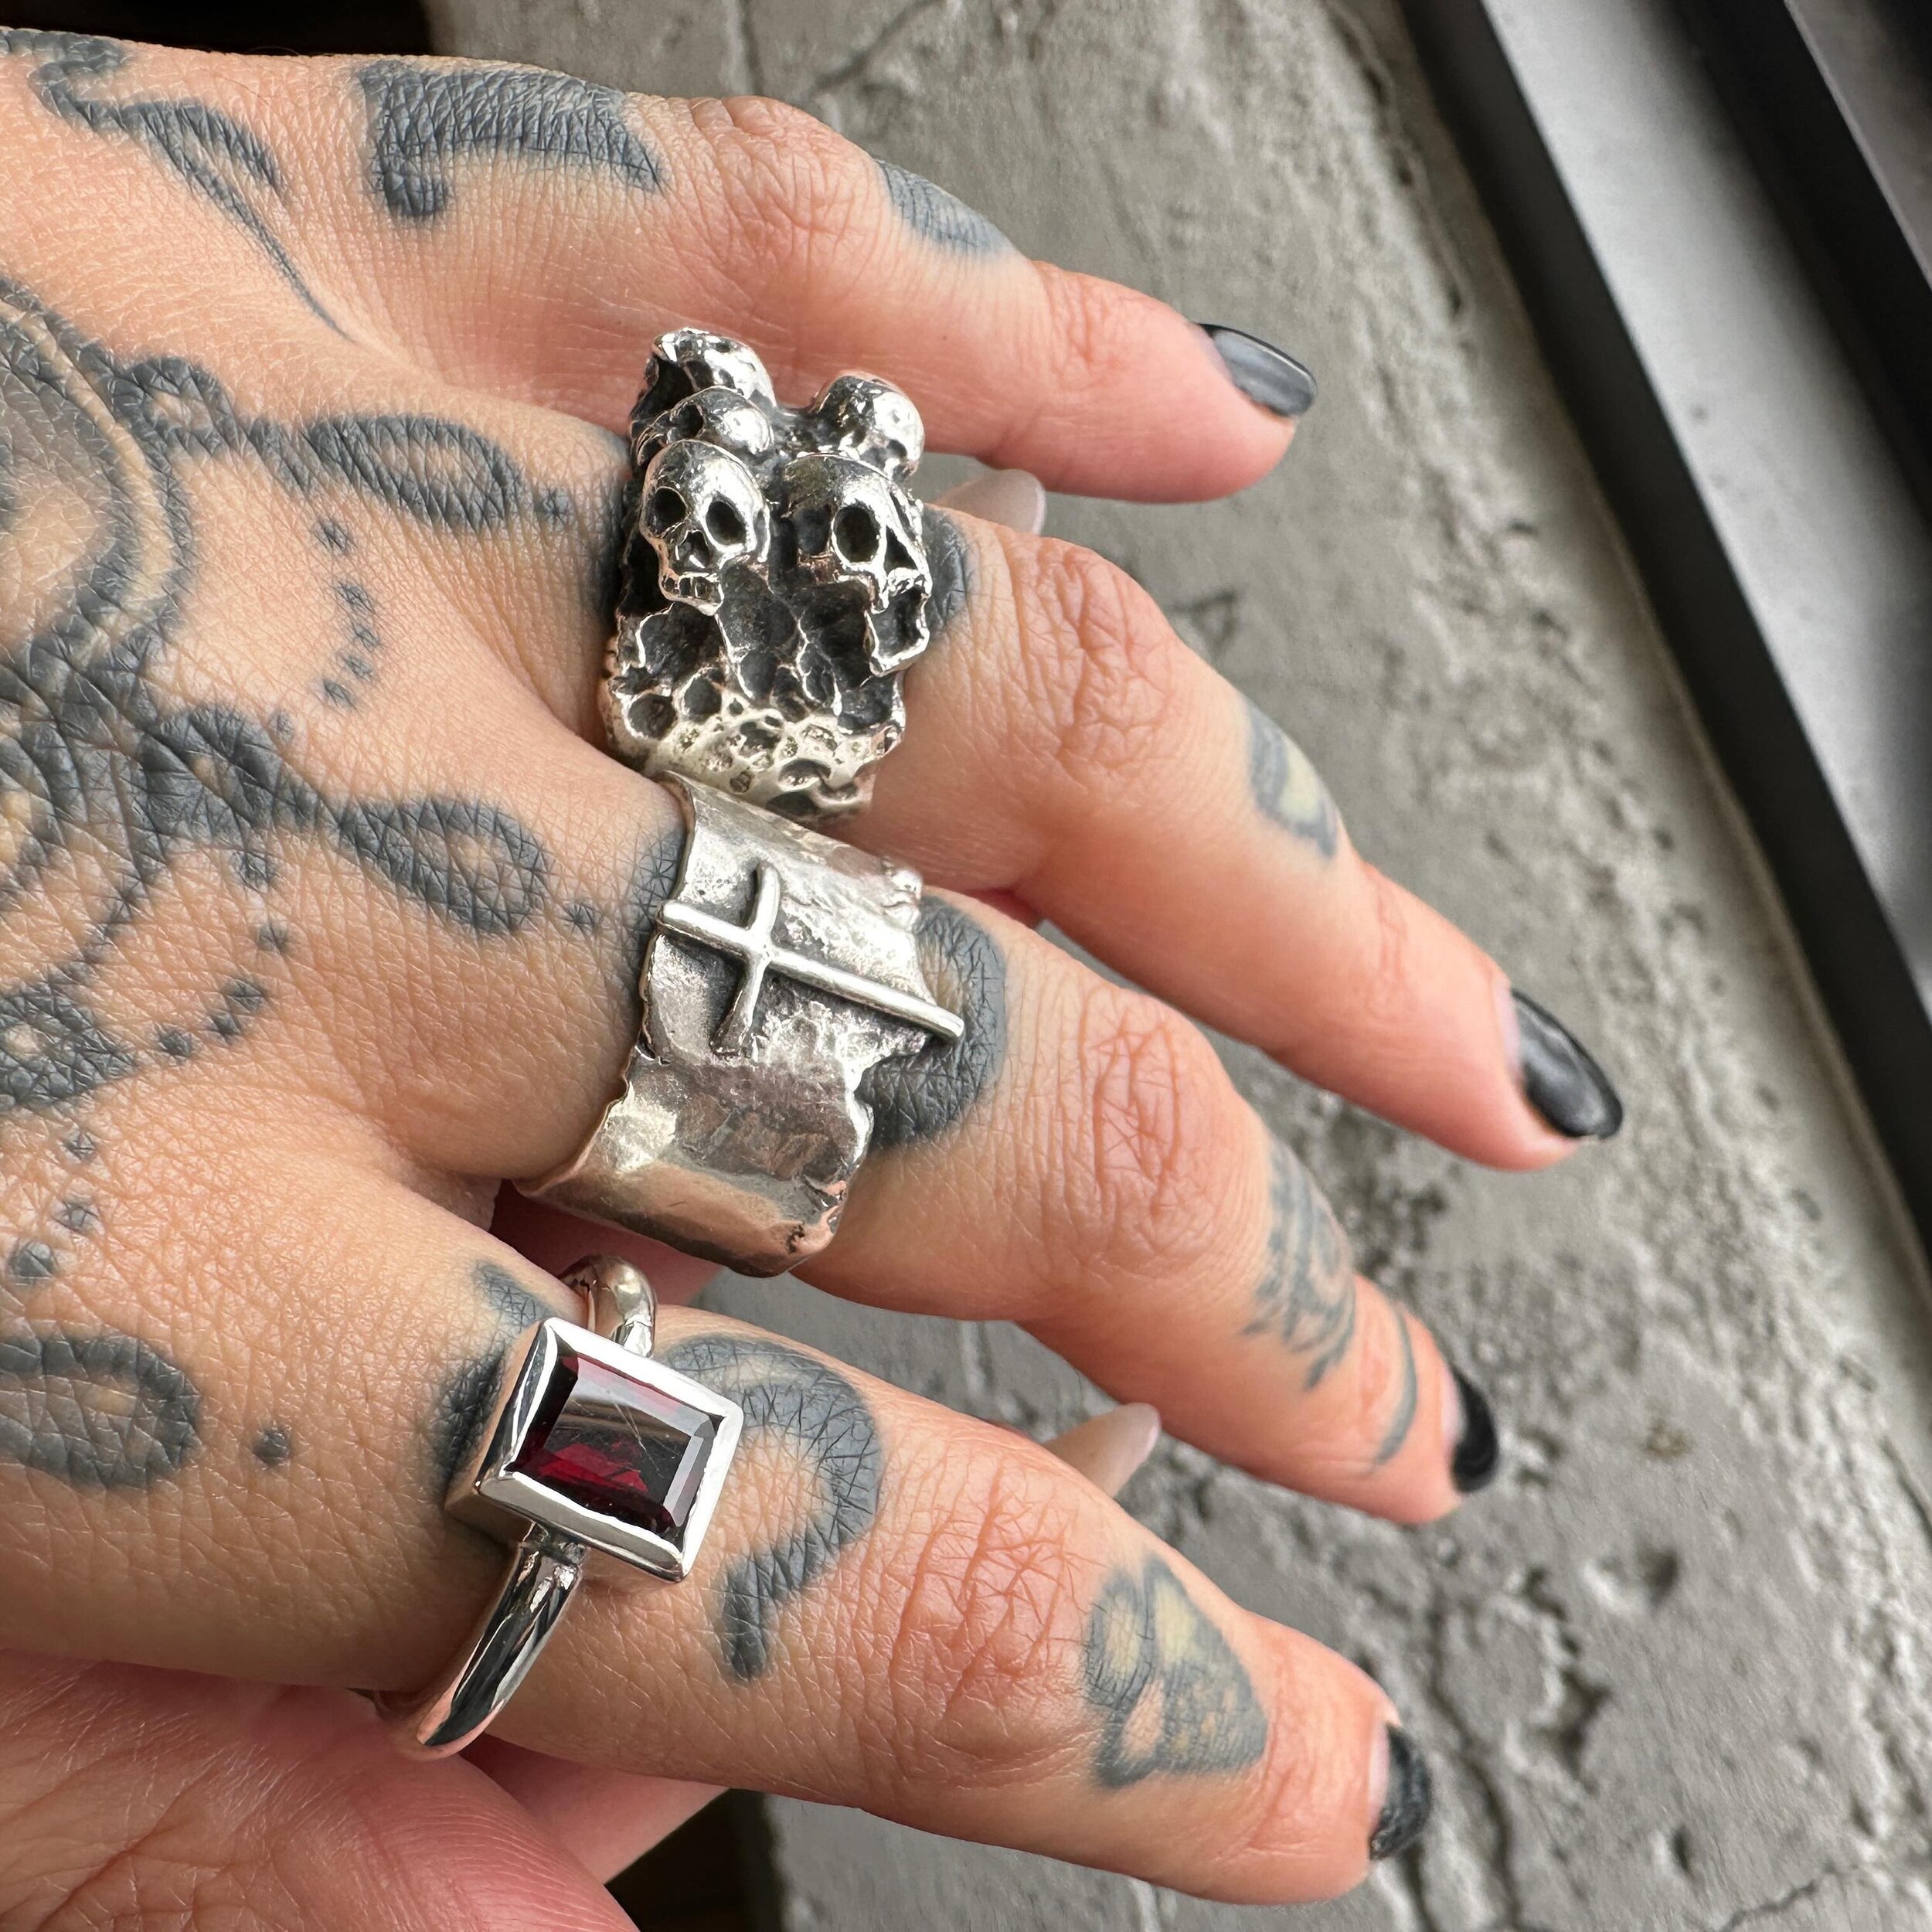 We feel so blessed to have wonderful clients 🖤🌹 thank you from the bottom of our hearts!

Here, Tania is wearing:
The Gardenia, The Mont-Royal &amp; her newly acquired 𝕭𝖑𝖔𝖔𝖉 𝕱𝖑𝖔𝖜 🩸 Garnet gemstone~~~ milles merci @la.punk 😘